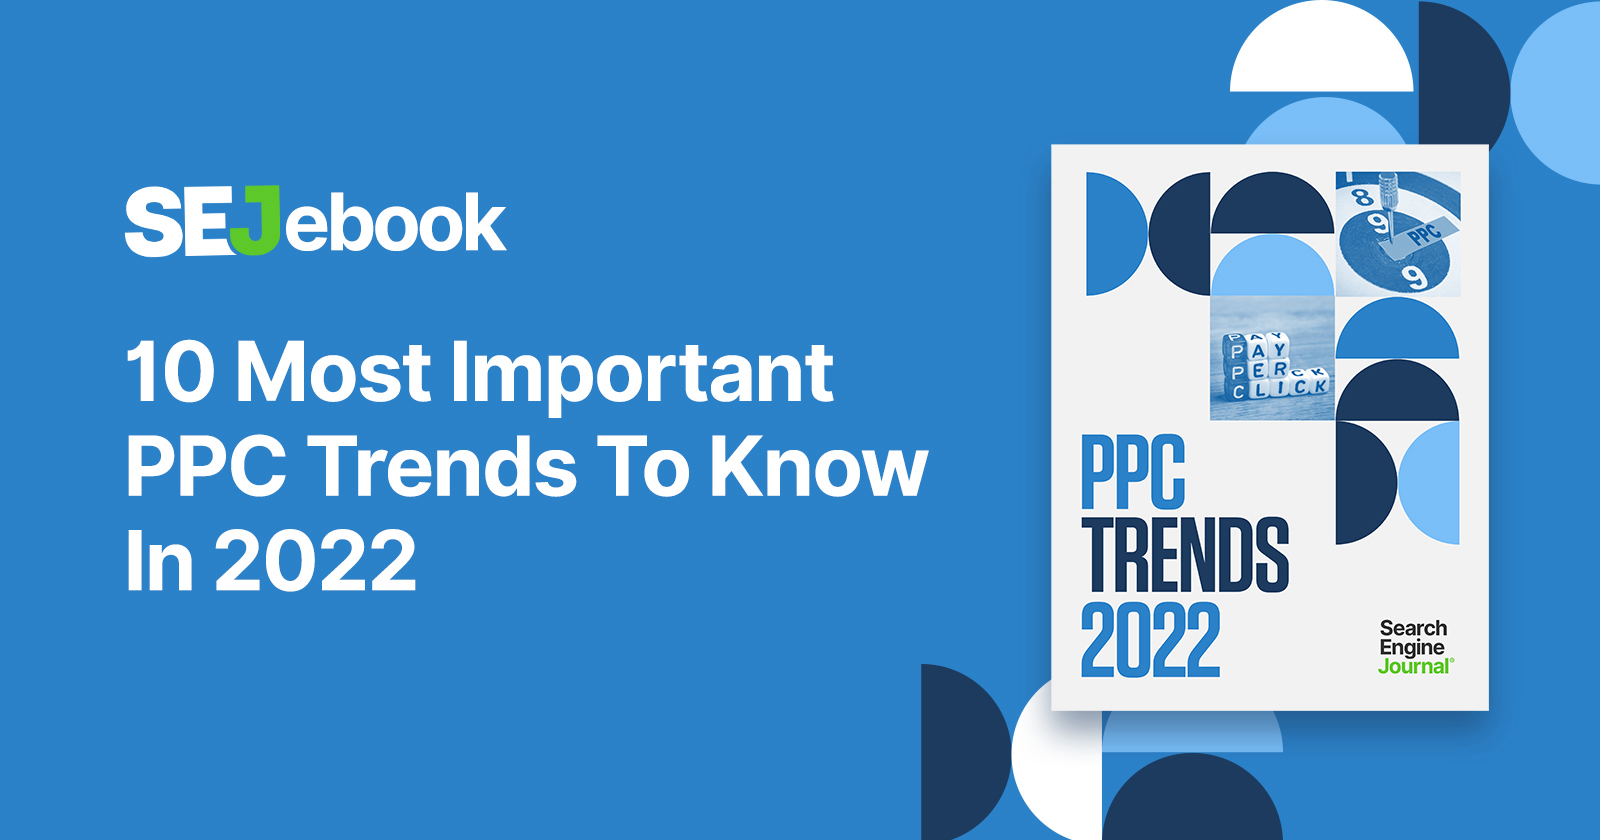 10 Most Important PPC Trends To Know In 2022 via @sejournal, @MrDannyGoodwin